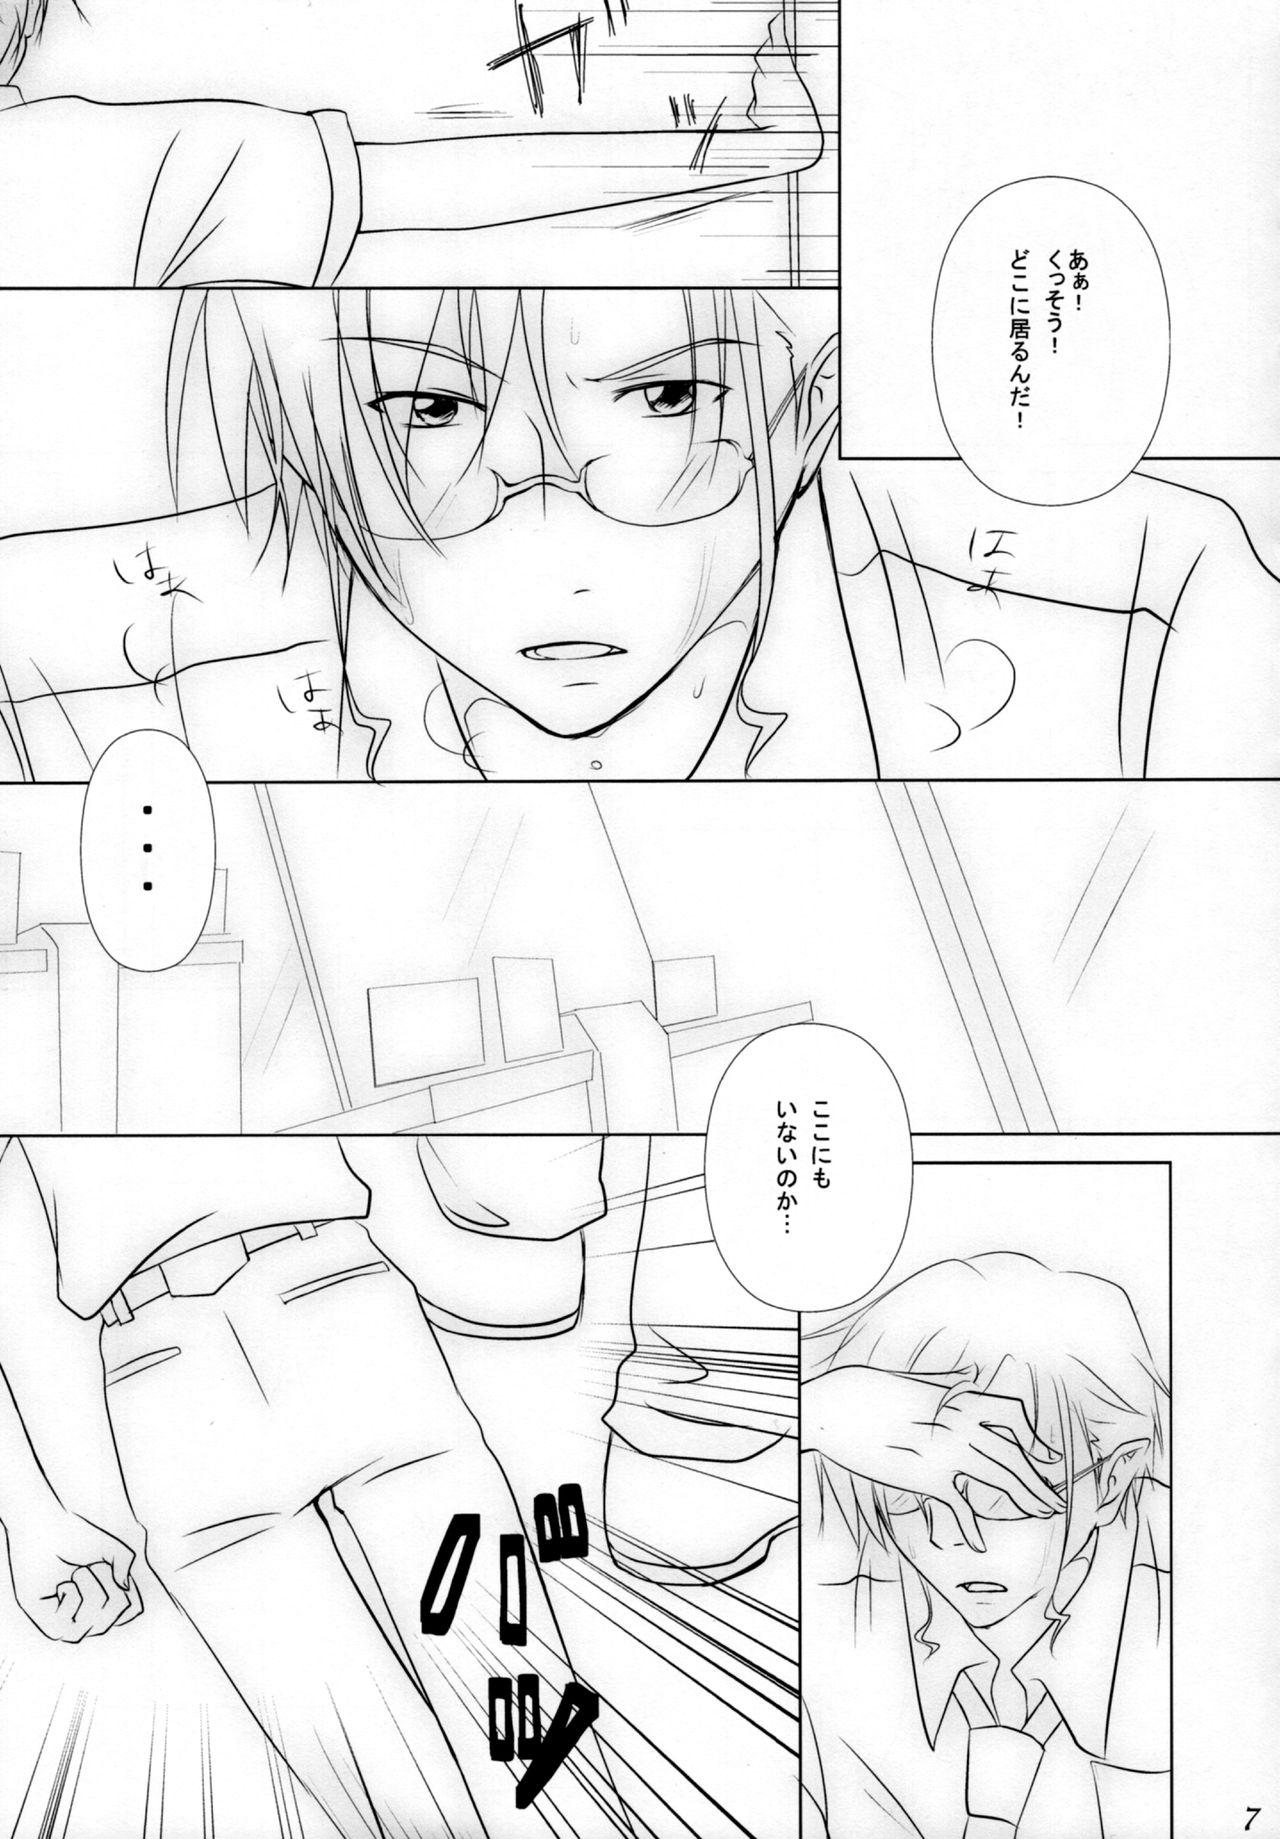 Girl Ever moment with you - Macross frontier Rough - Page 6